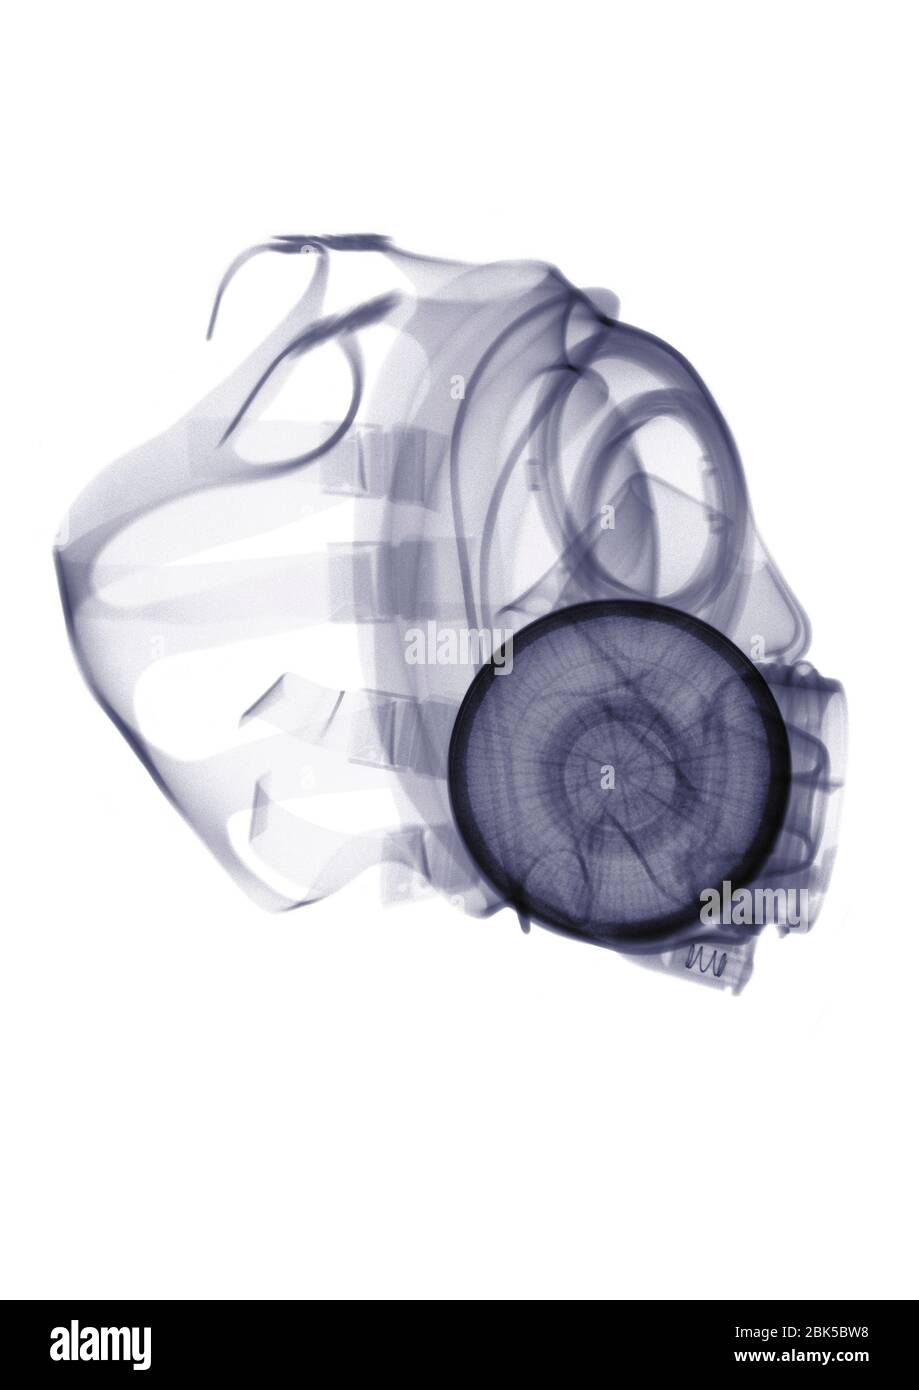 Gas mask from the side, X-ray. Stock Photo